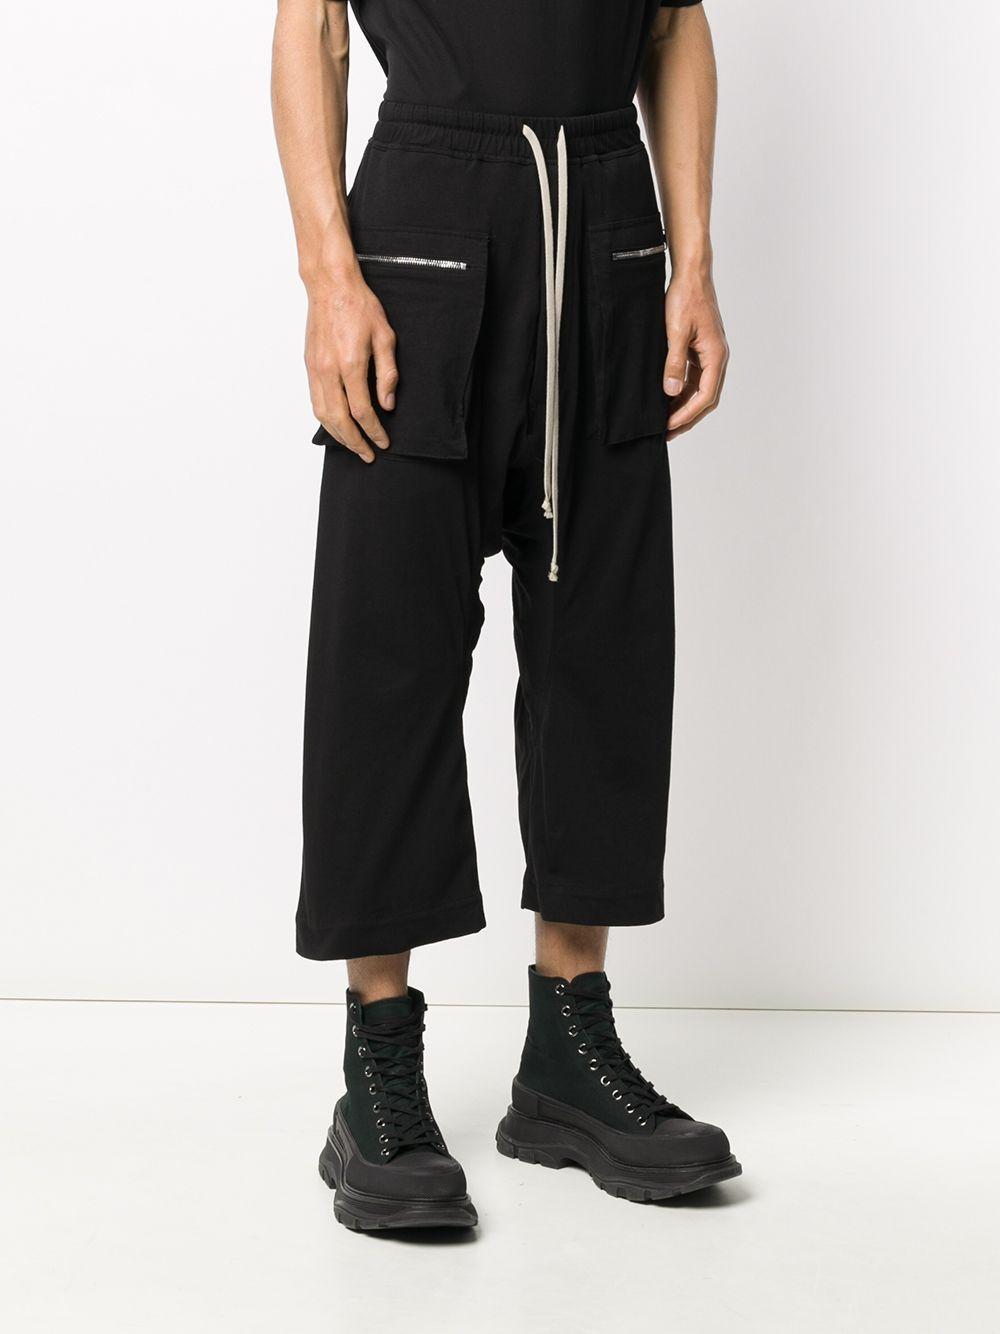 Rick Owens Drkshdw Cropped Cotton Cargo Trousers in Black for Men - Lyst